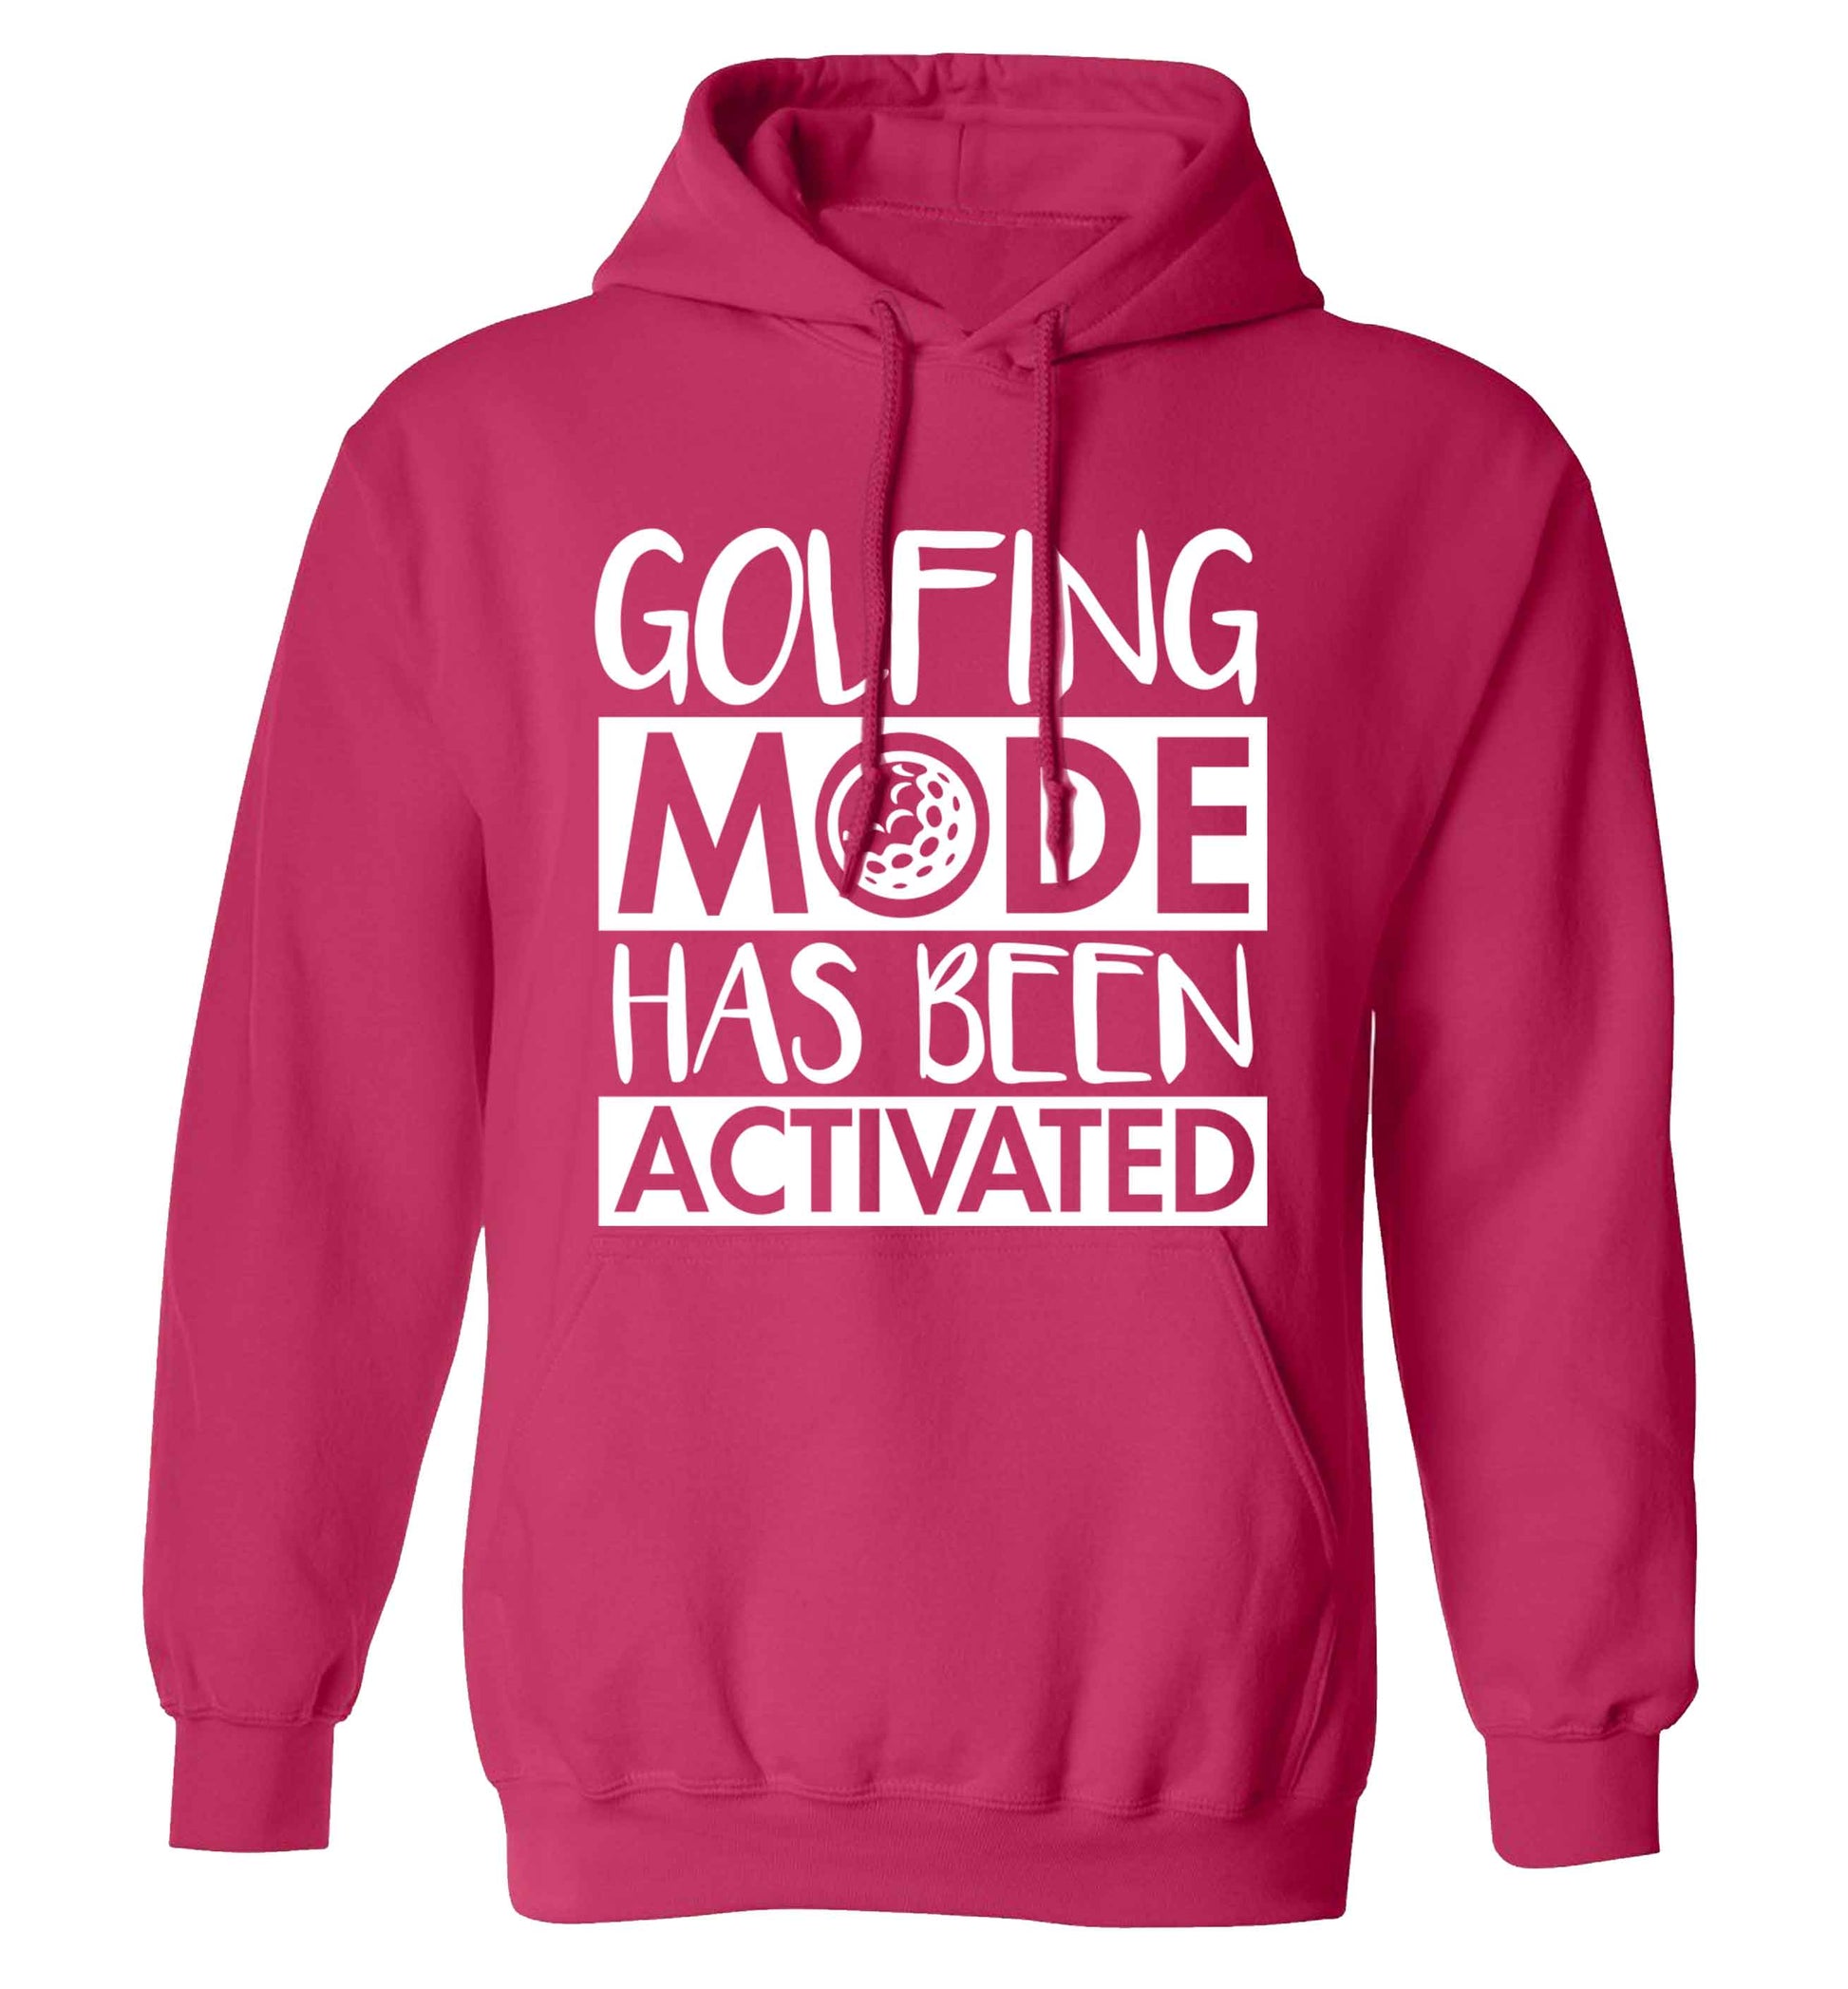 Golfing mode has been activated adults unisex pink hoodie 2XL